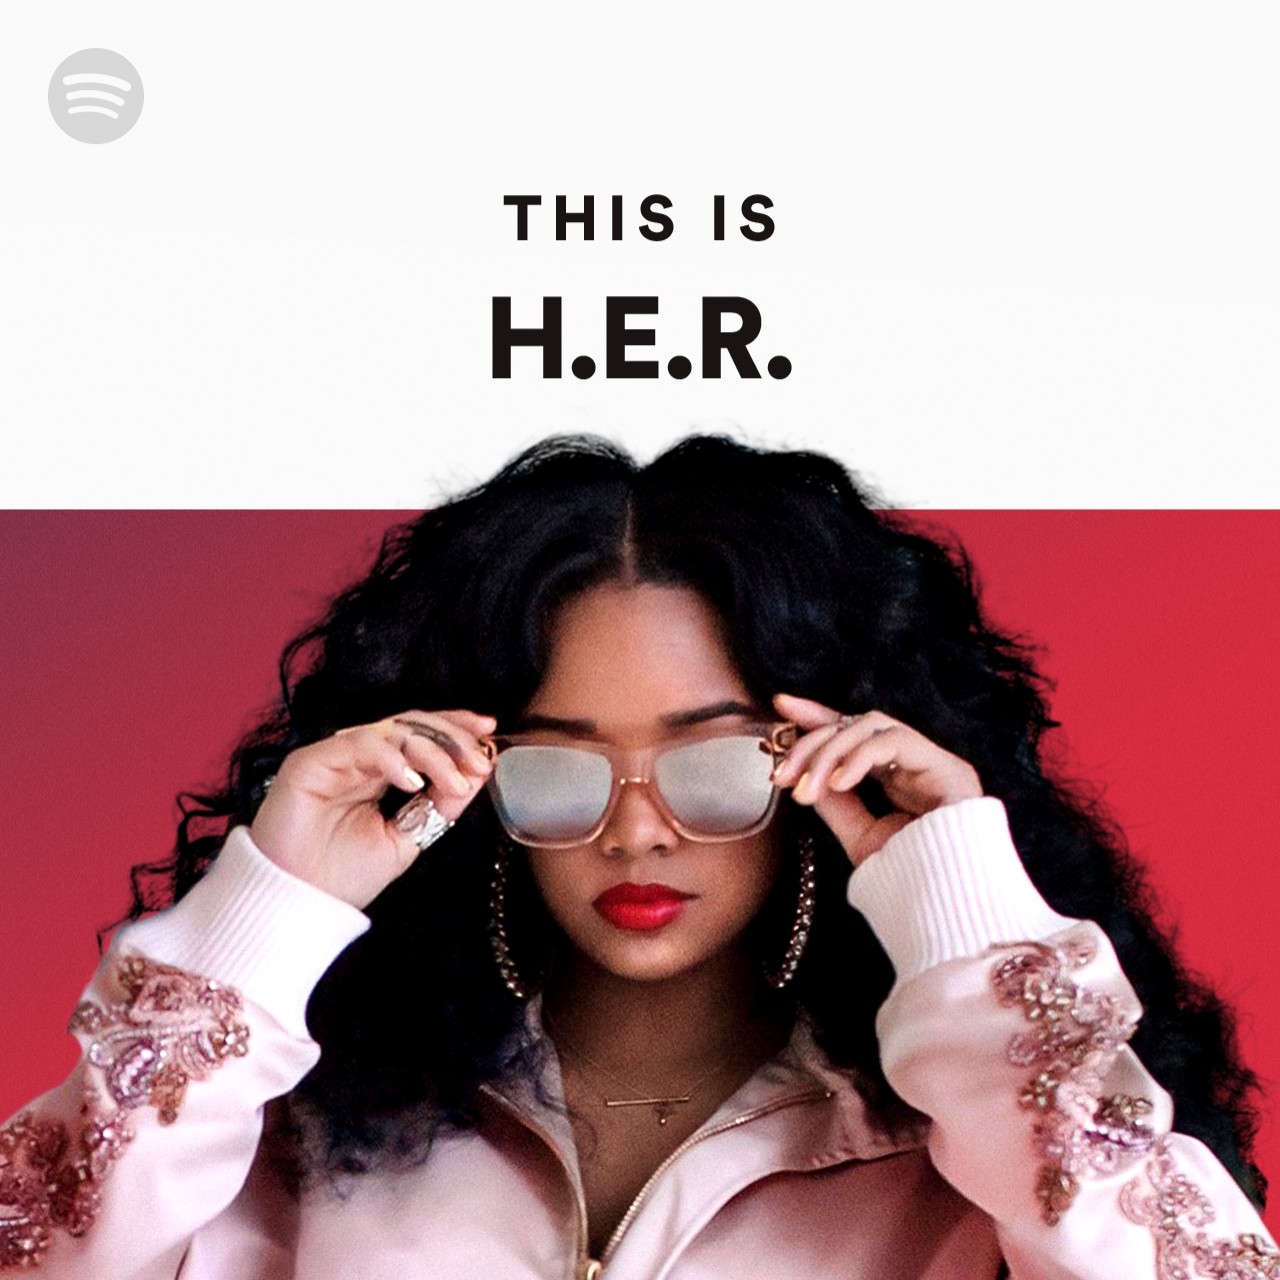 This Is H.E.R.